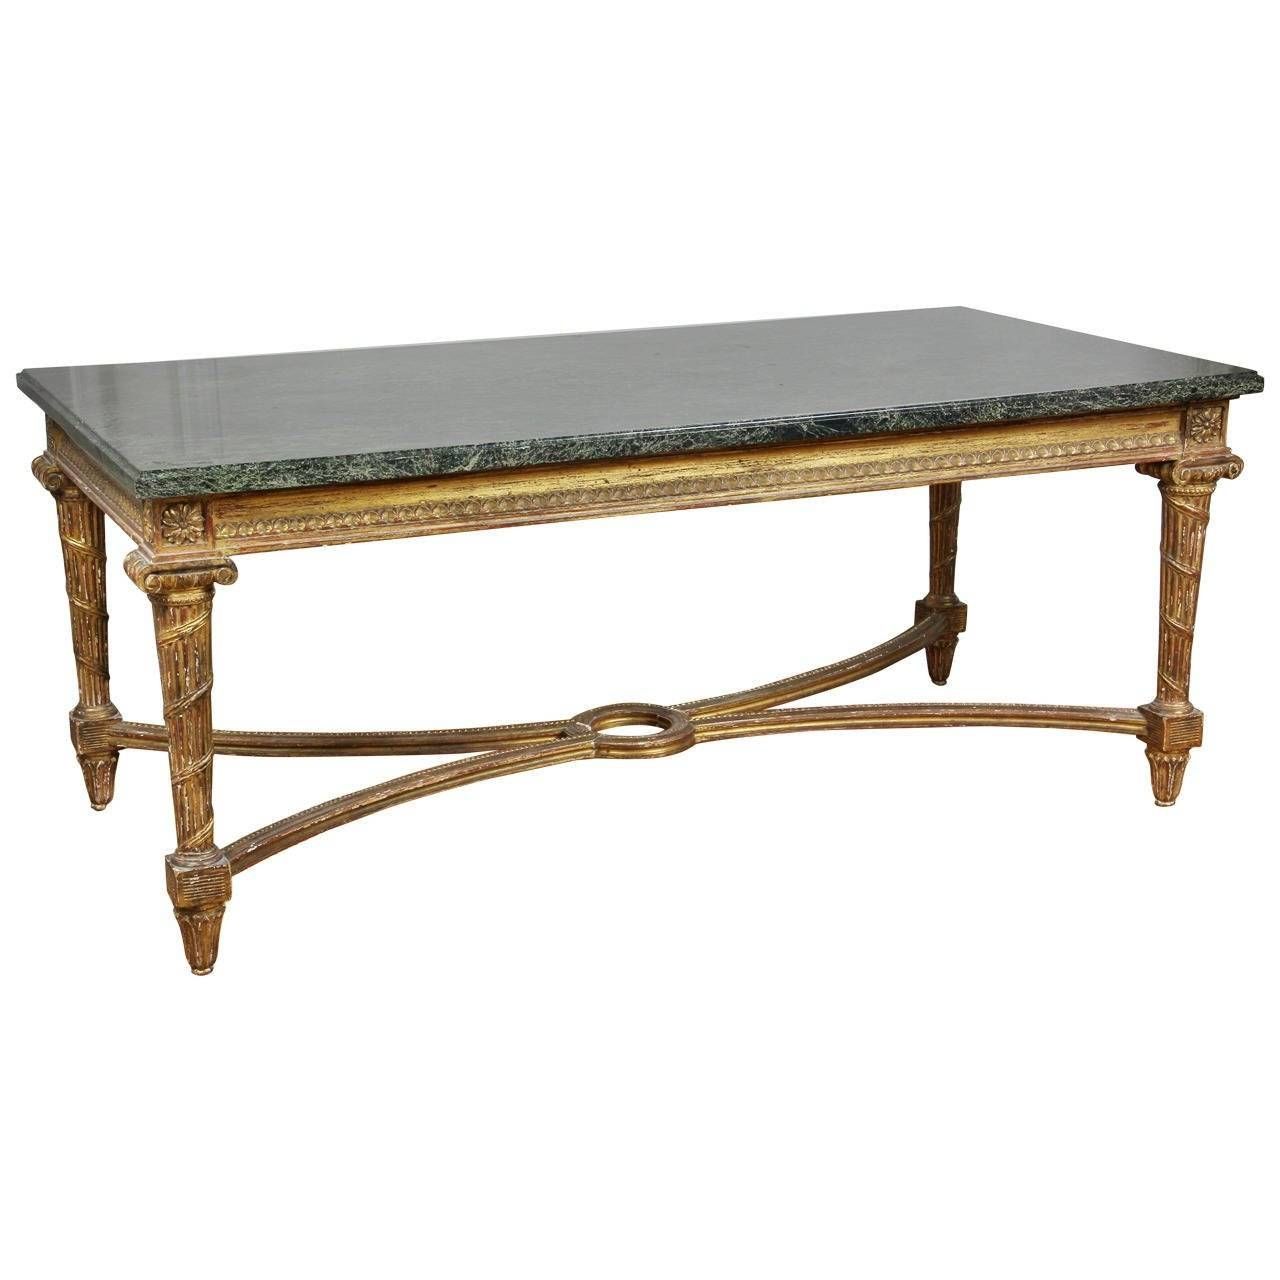 French Neoclassical Style Giltwood Coffee Table For Sale At 1stdibs Within French Style Coffee Tables (View 17 of 30)